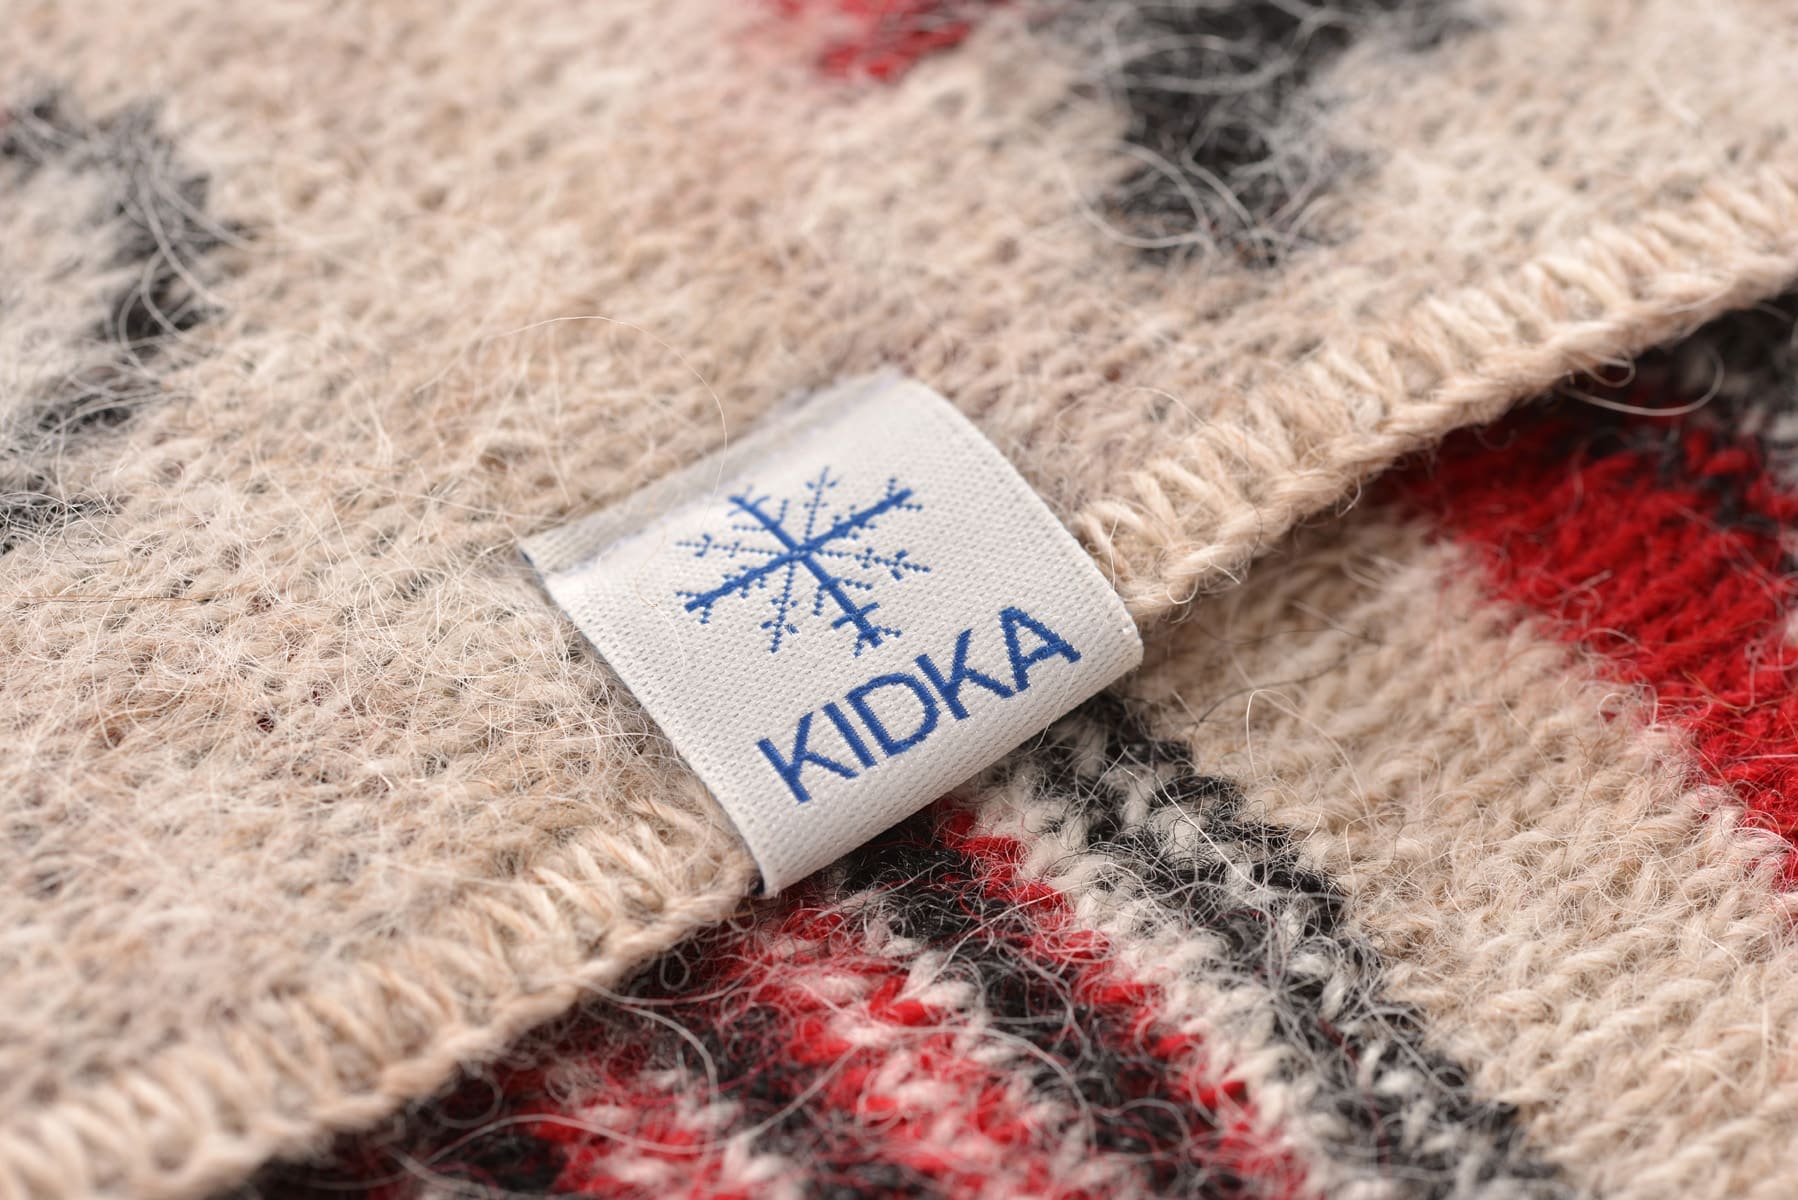 KIDKA produces Icelandic wool products, inspired by traditional Icelandic patterns .